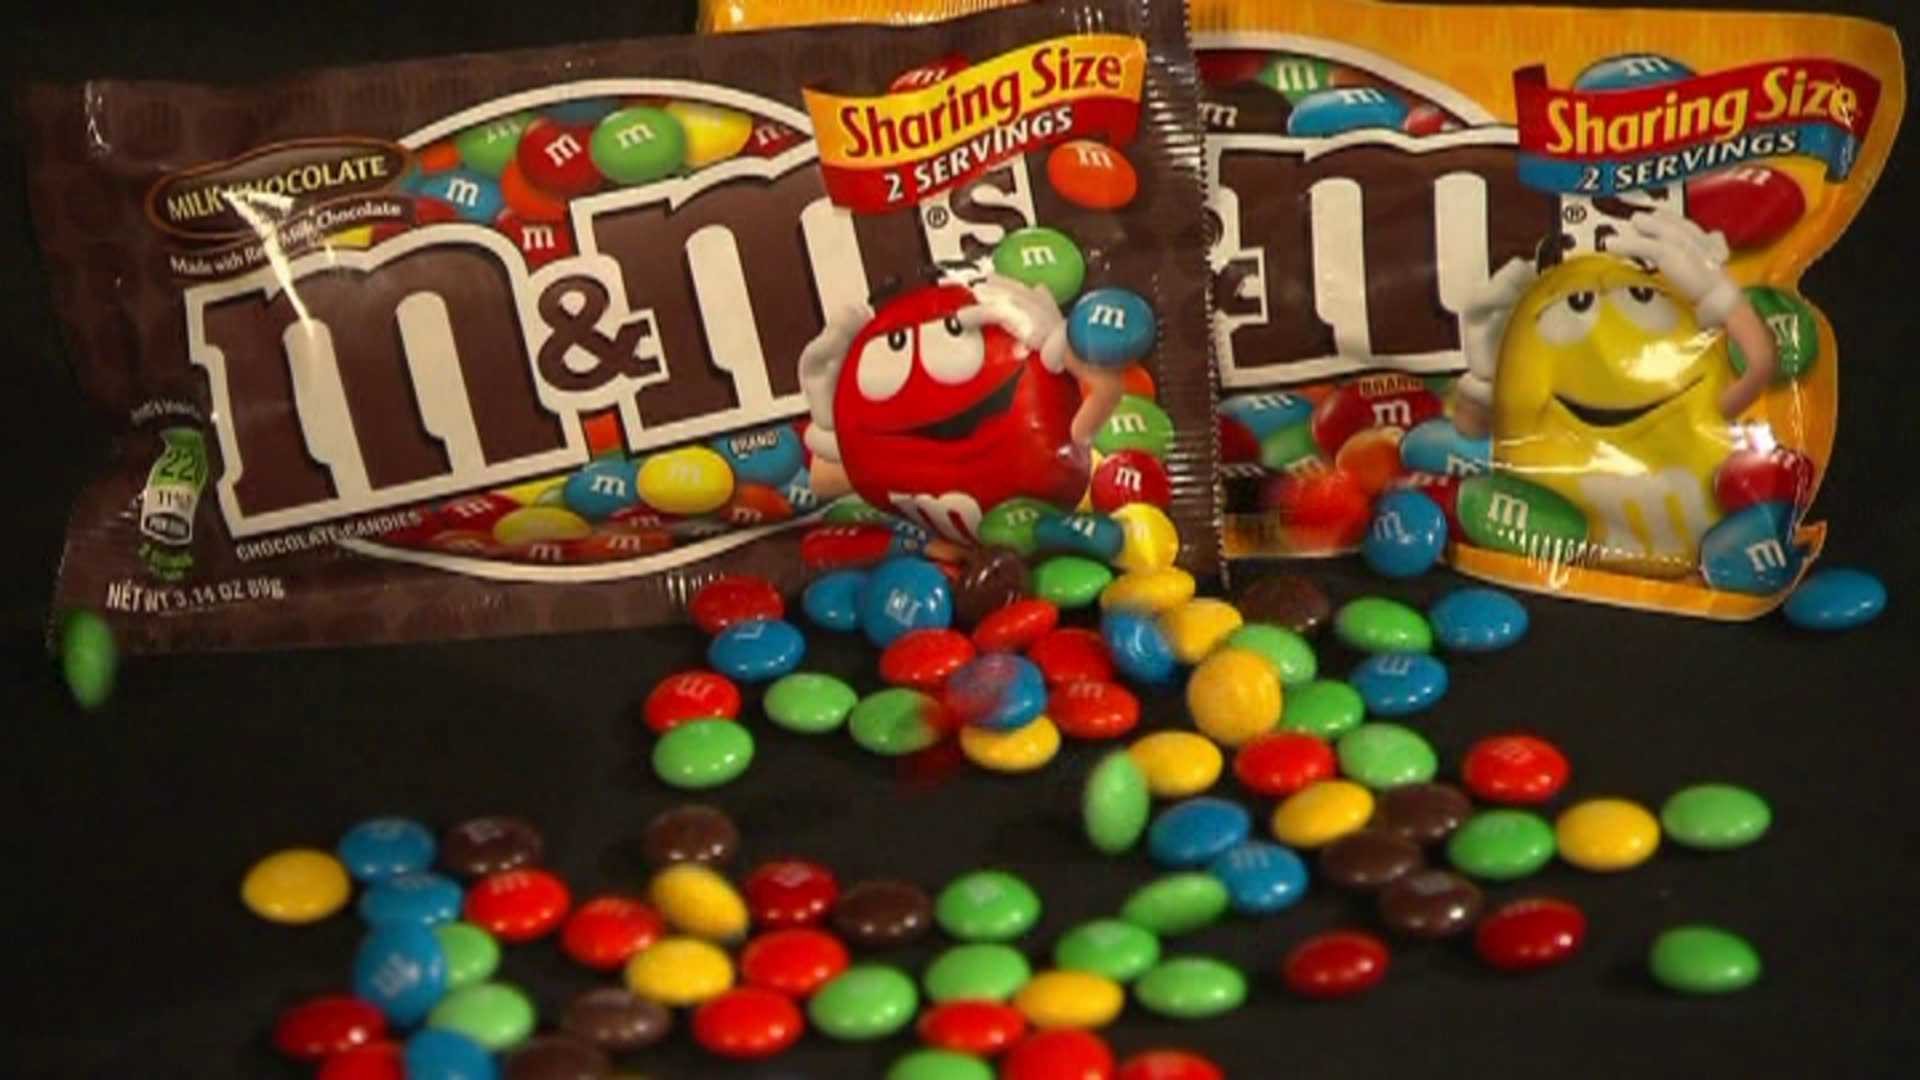 1920x1080 (KTVI) – The dyes that give M&Ms their colors are coming under fire. One  woman says the artificial food coloring made her son hyperactive.